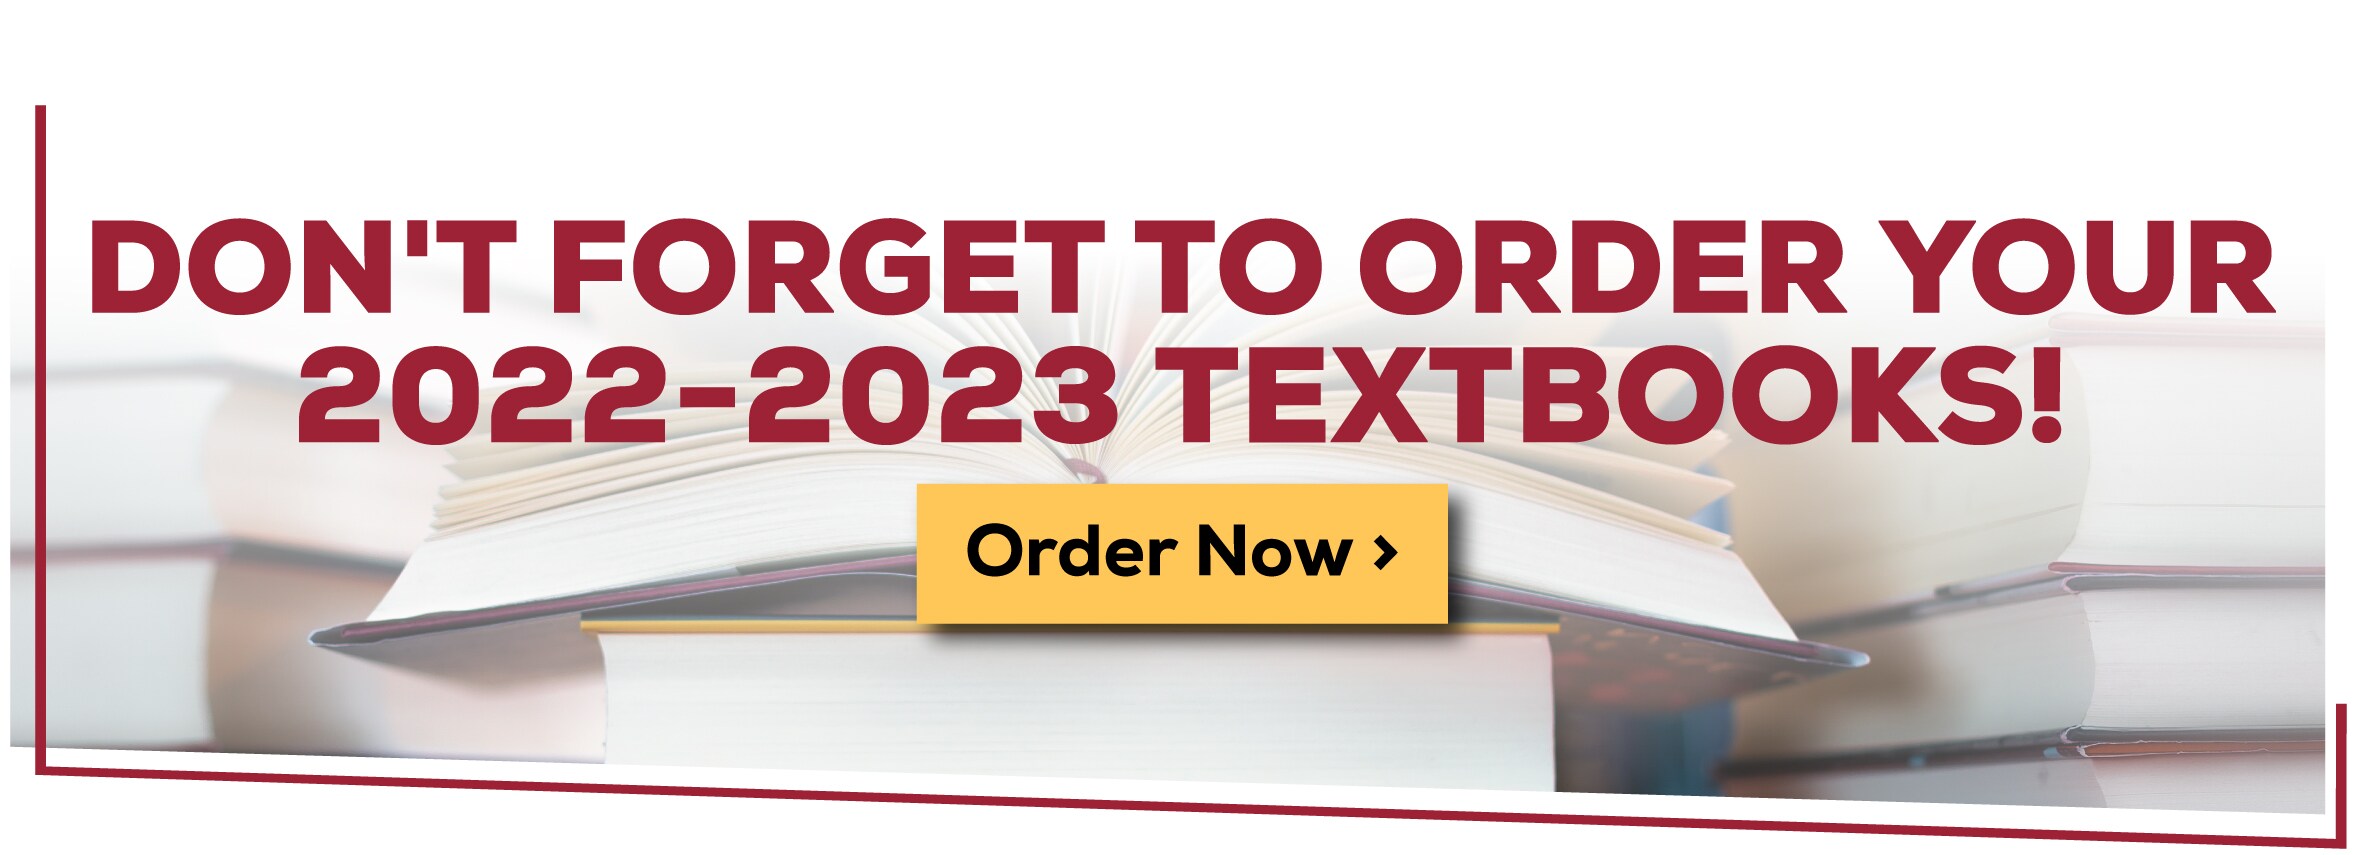 Don't forget to order your 2022-2023 textbooks! Order Now!						